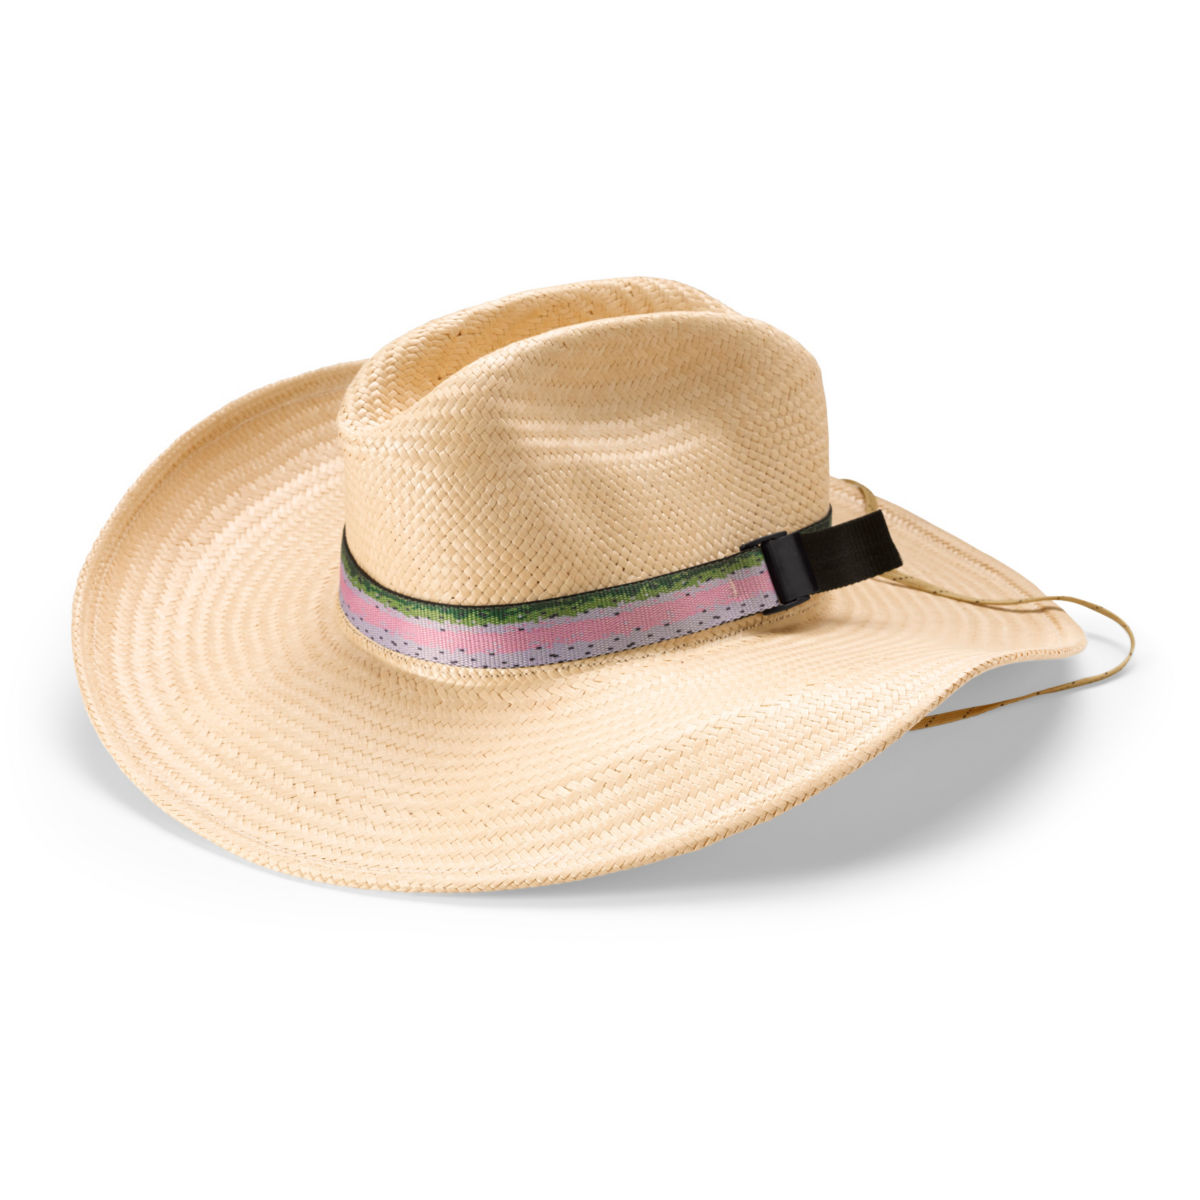 Trout Print Straw Hat - NATURALimage number 0